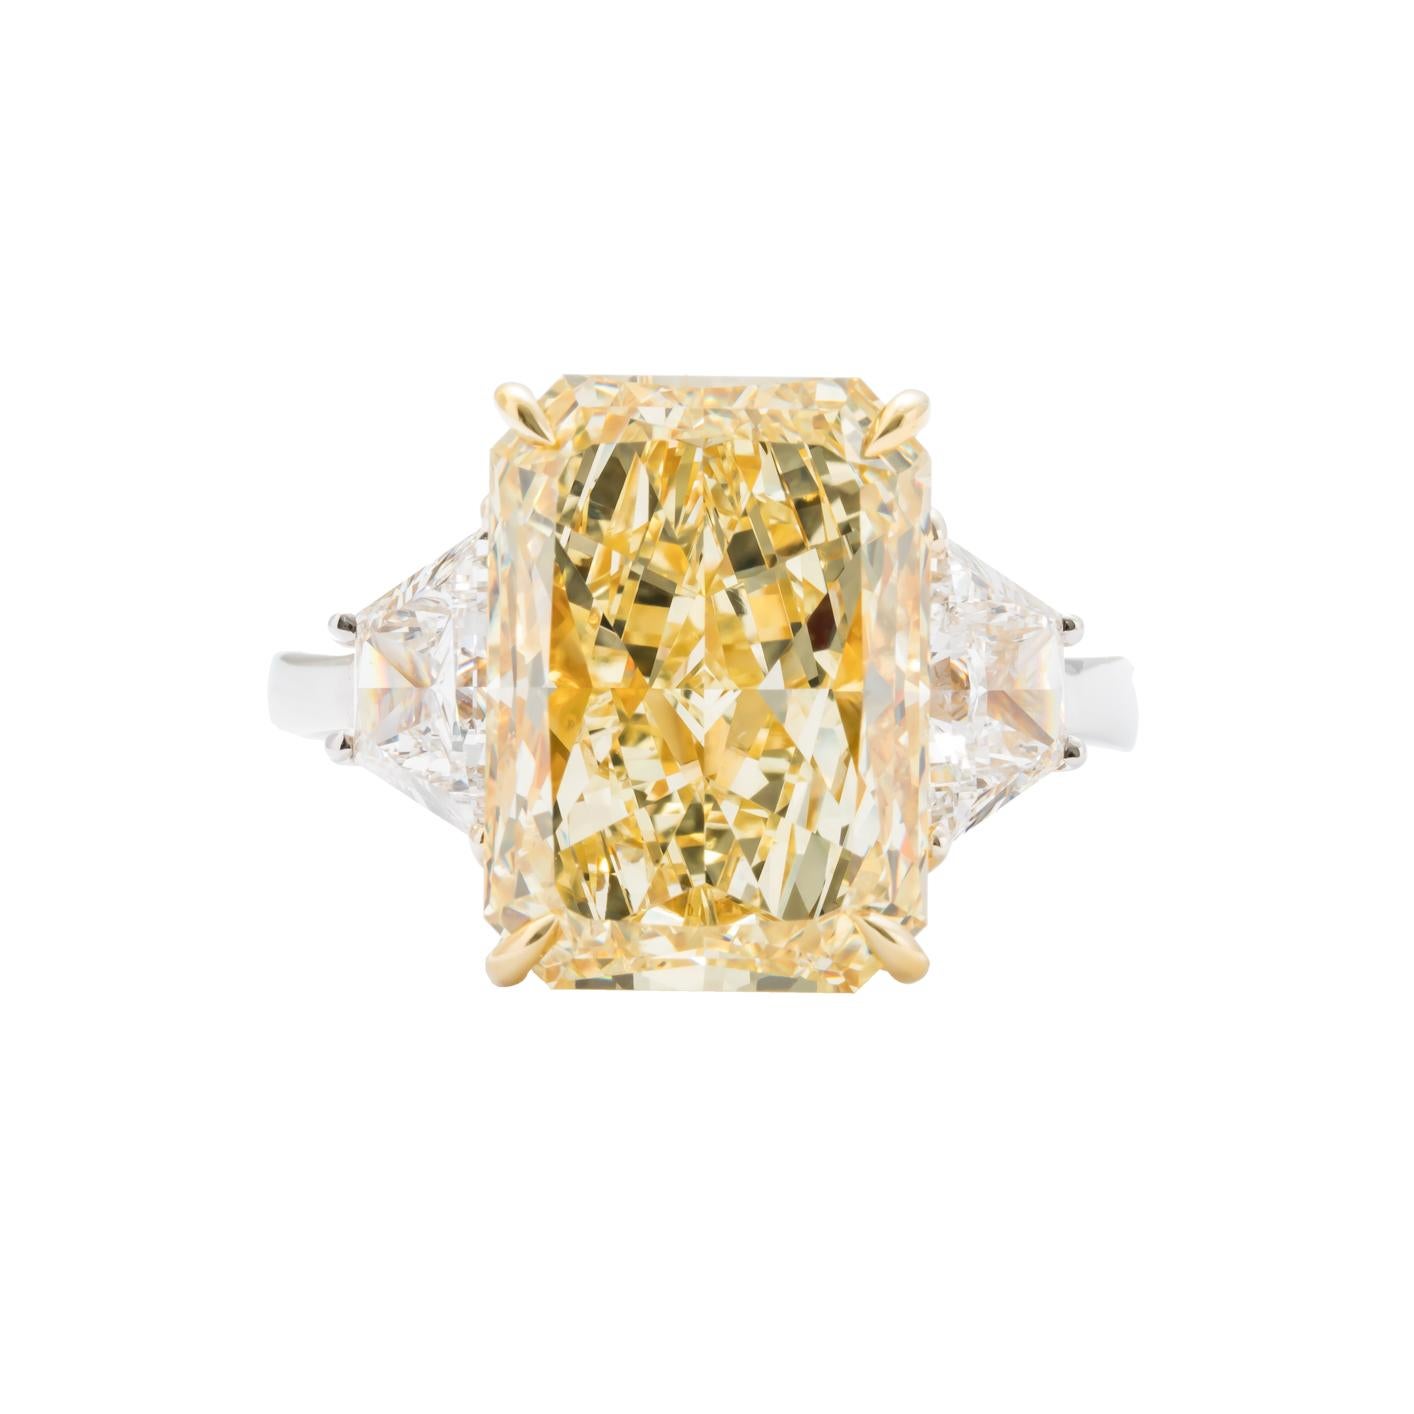 Custom Platinum and 18 karat yellow gold three stone ring featuring one radiant cut Fancy Yellow Diamond weighing 7.95 carats with color and clarity of FY VS2; accompanied with GIA certificate #1186712477. Flanked by two trapezoid diamonds weighing